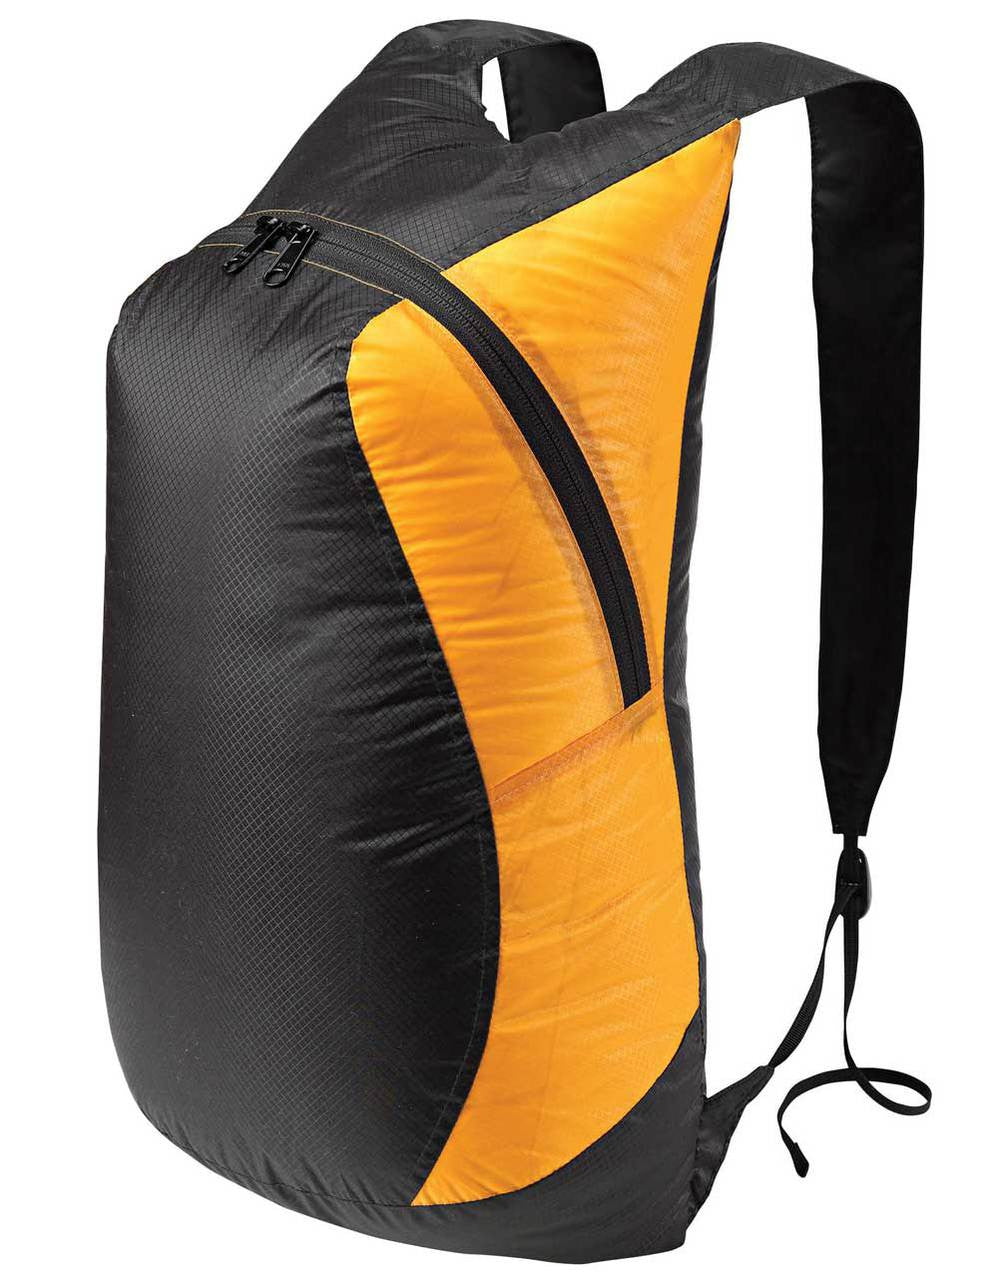 Sea to Summit Day Pack, Yellow/Black